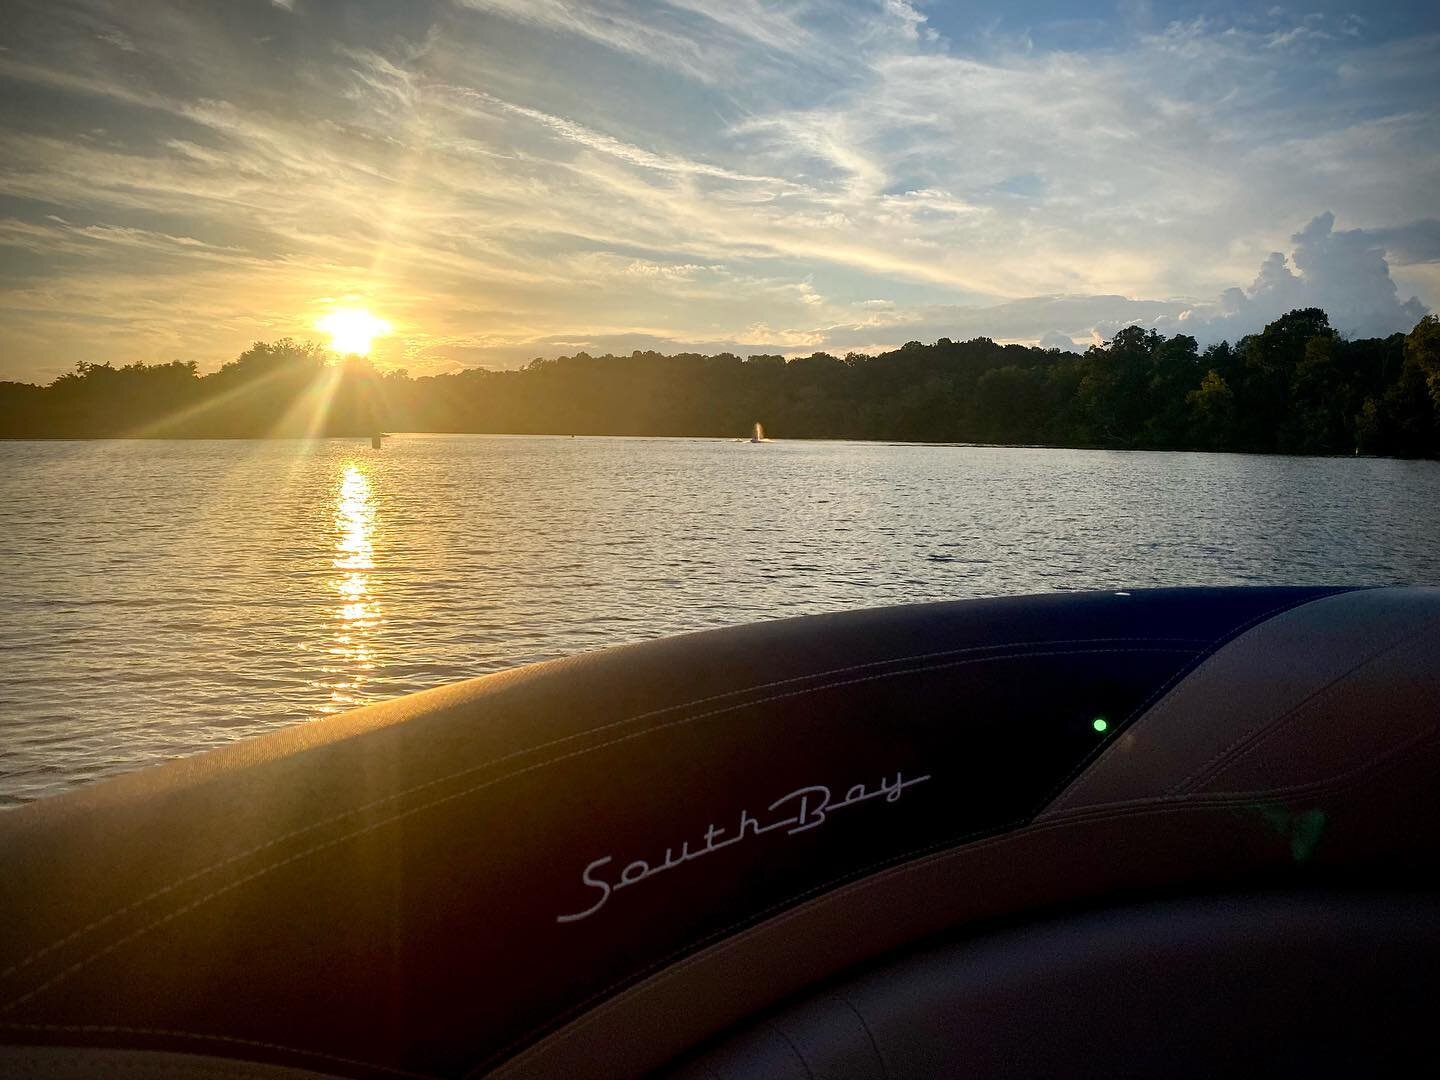 🧡⚓️I mean&hellip;These colors!!⚓️🧡
#southbay #tennesseeriver #tennessee #knox #knoxville #knoxvilletn #knoxvilletennessee #pontoon #rental #rentals #boating #downtownknox #downtownknoxville #summer